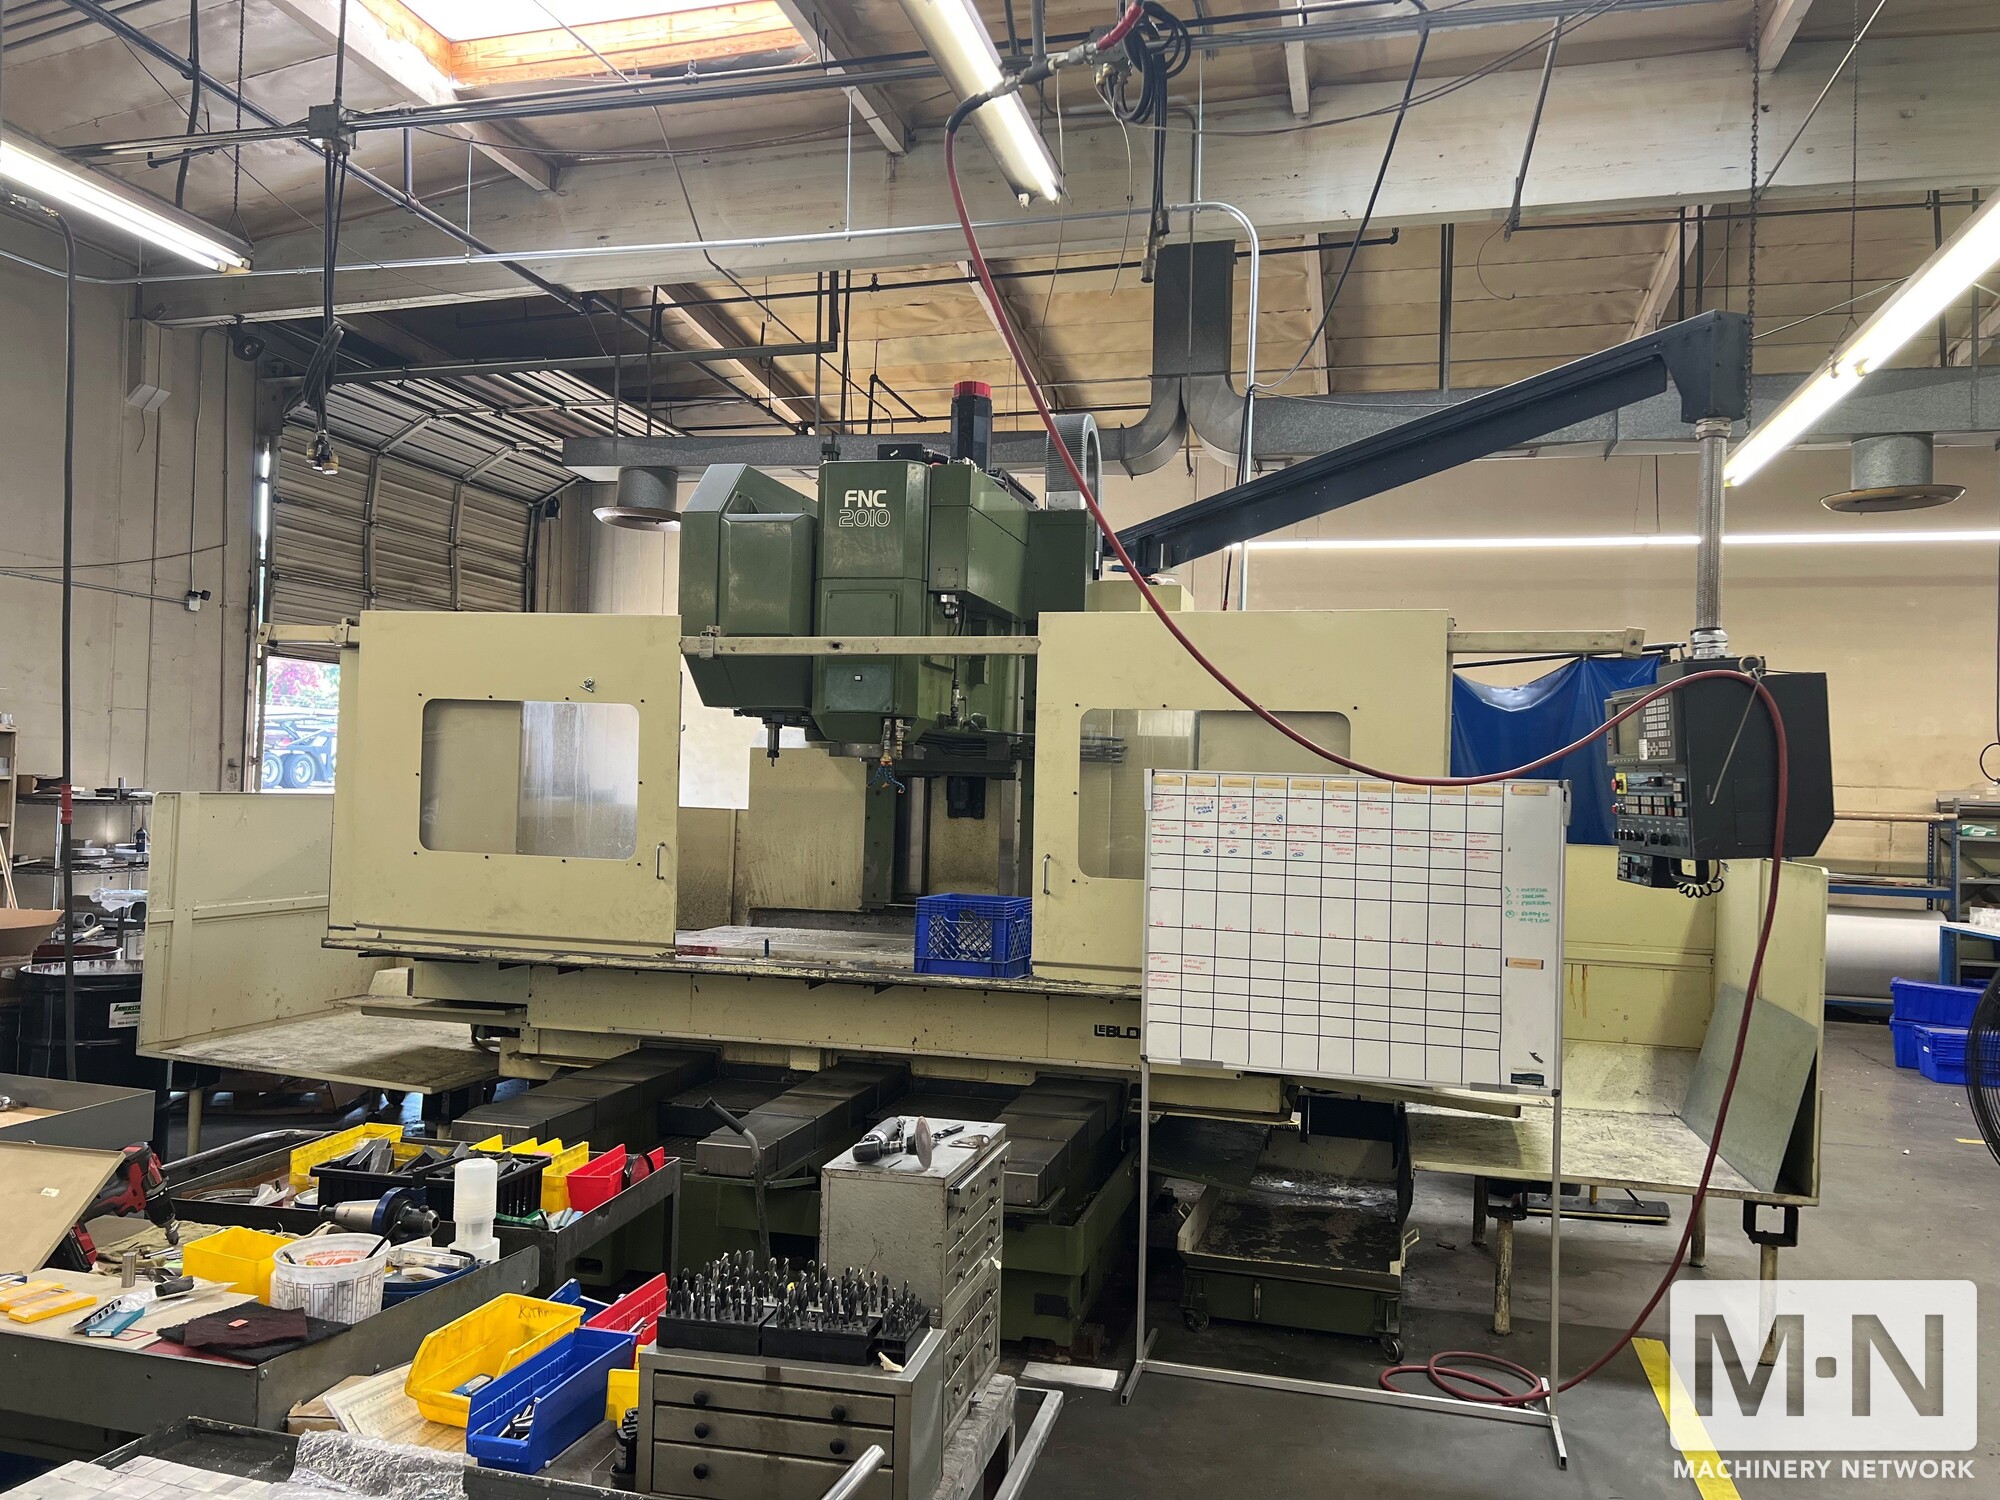 1998 LEBLOND MAKINO FNC2010-A30 MACHINING CENTERS, VERTICAL, N/C & CNC, (Multiple Spindle) | Machinery Network Inc.